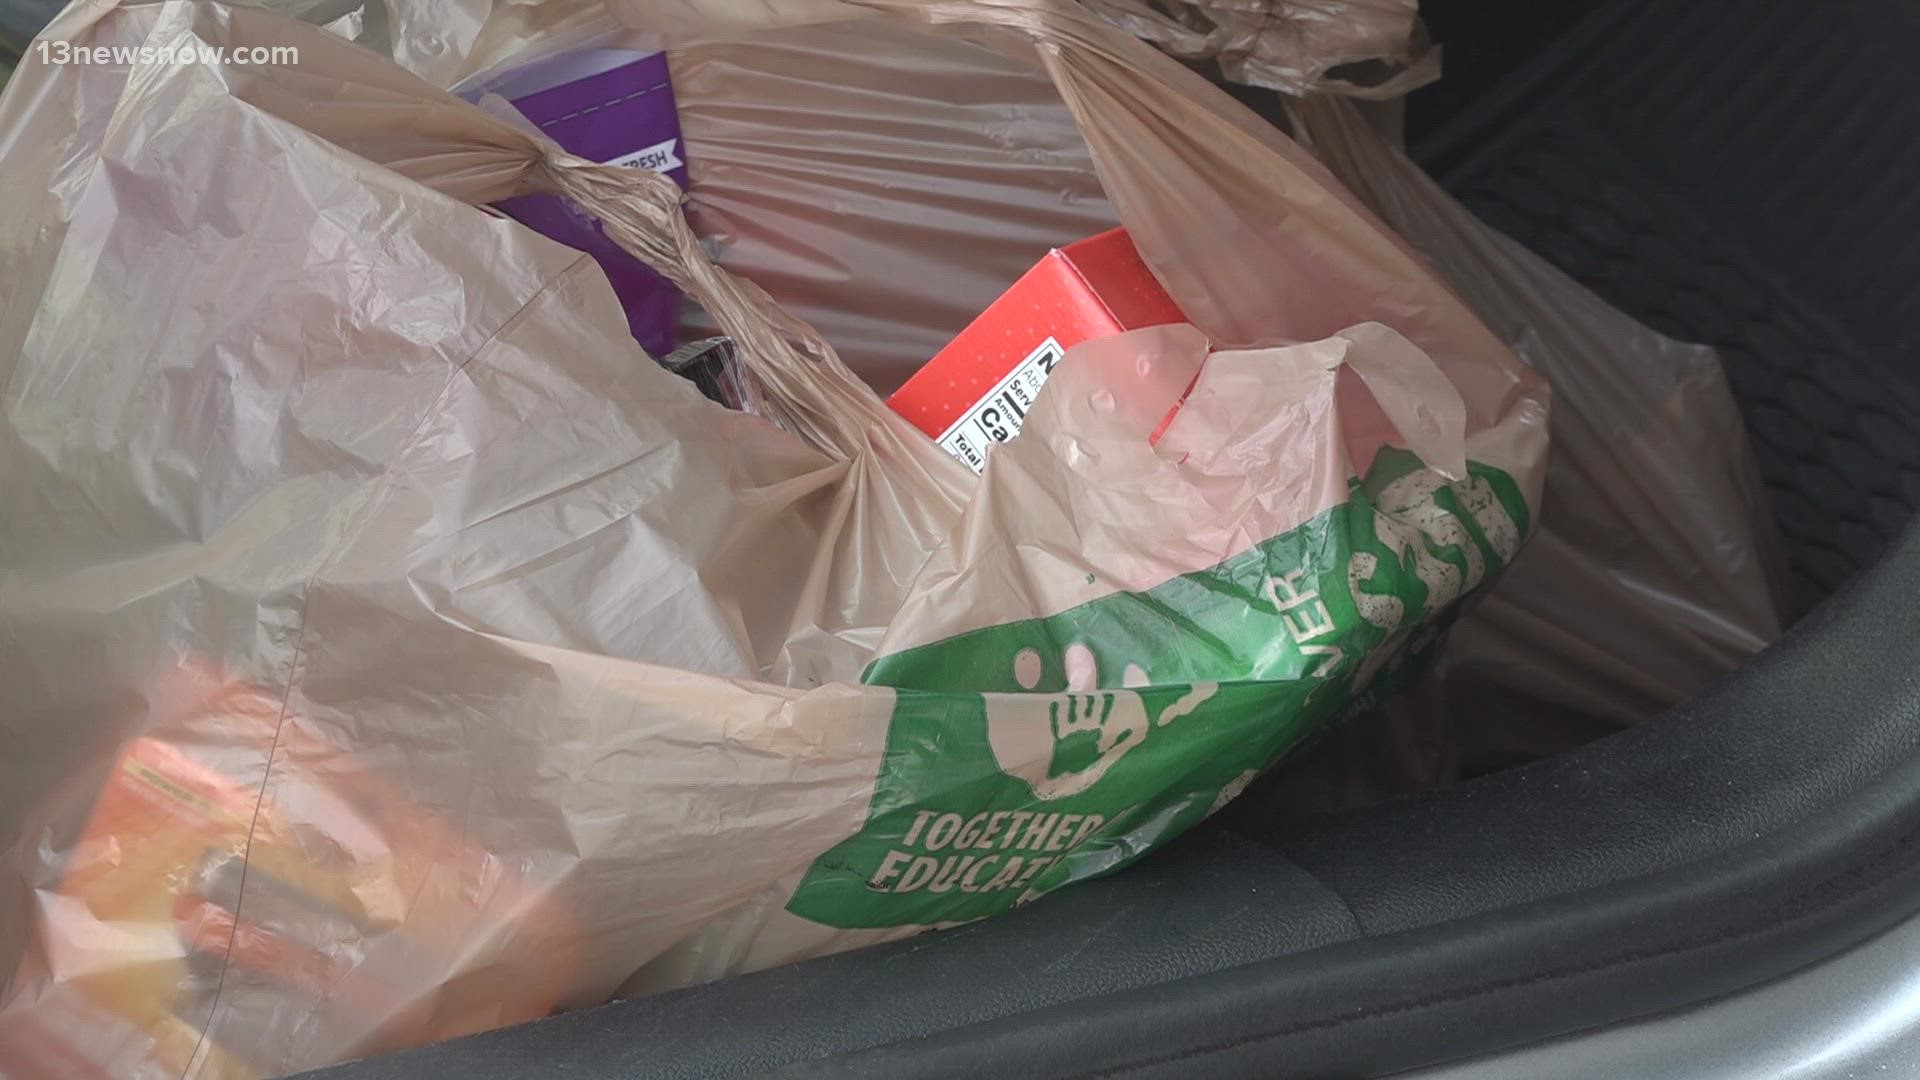 Your trip to any grocery store in Virginia Beach could cost you a bit more change.